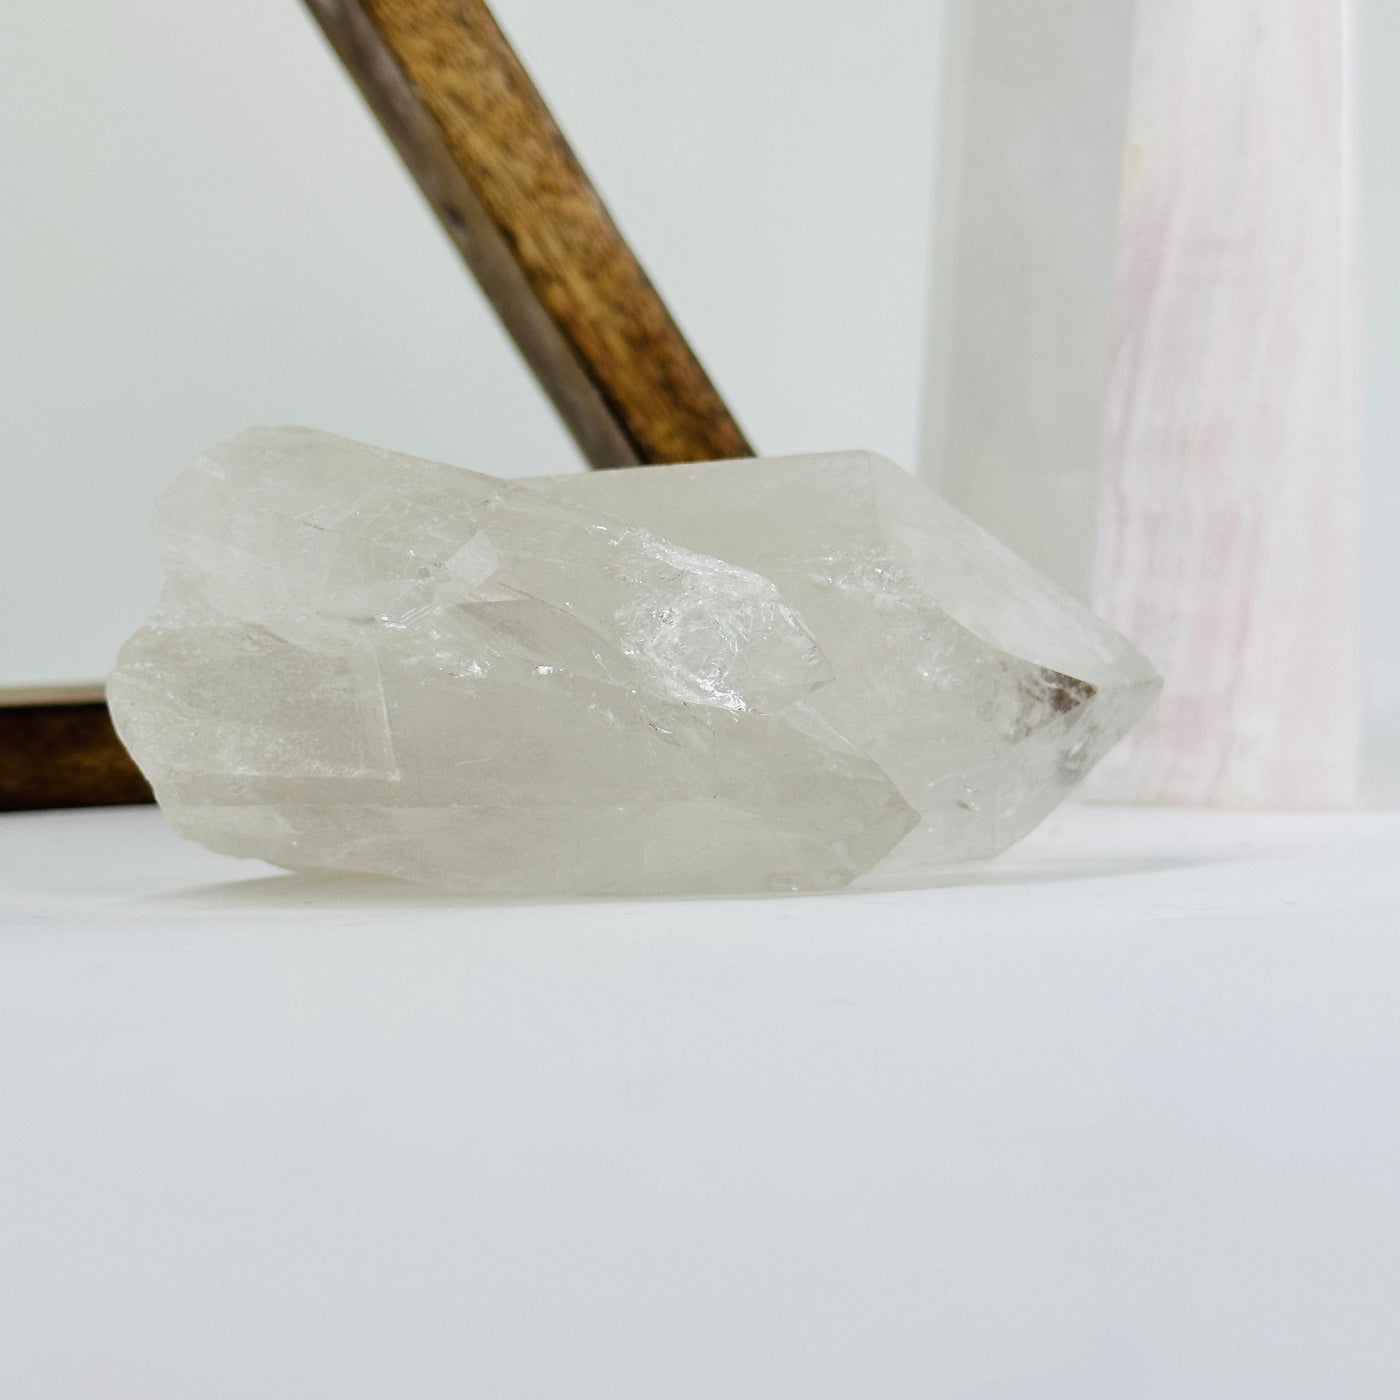 crystal quartz cluster with decorations in the background